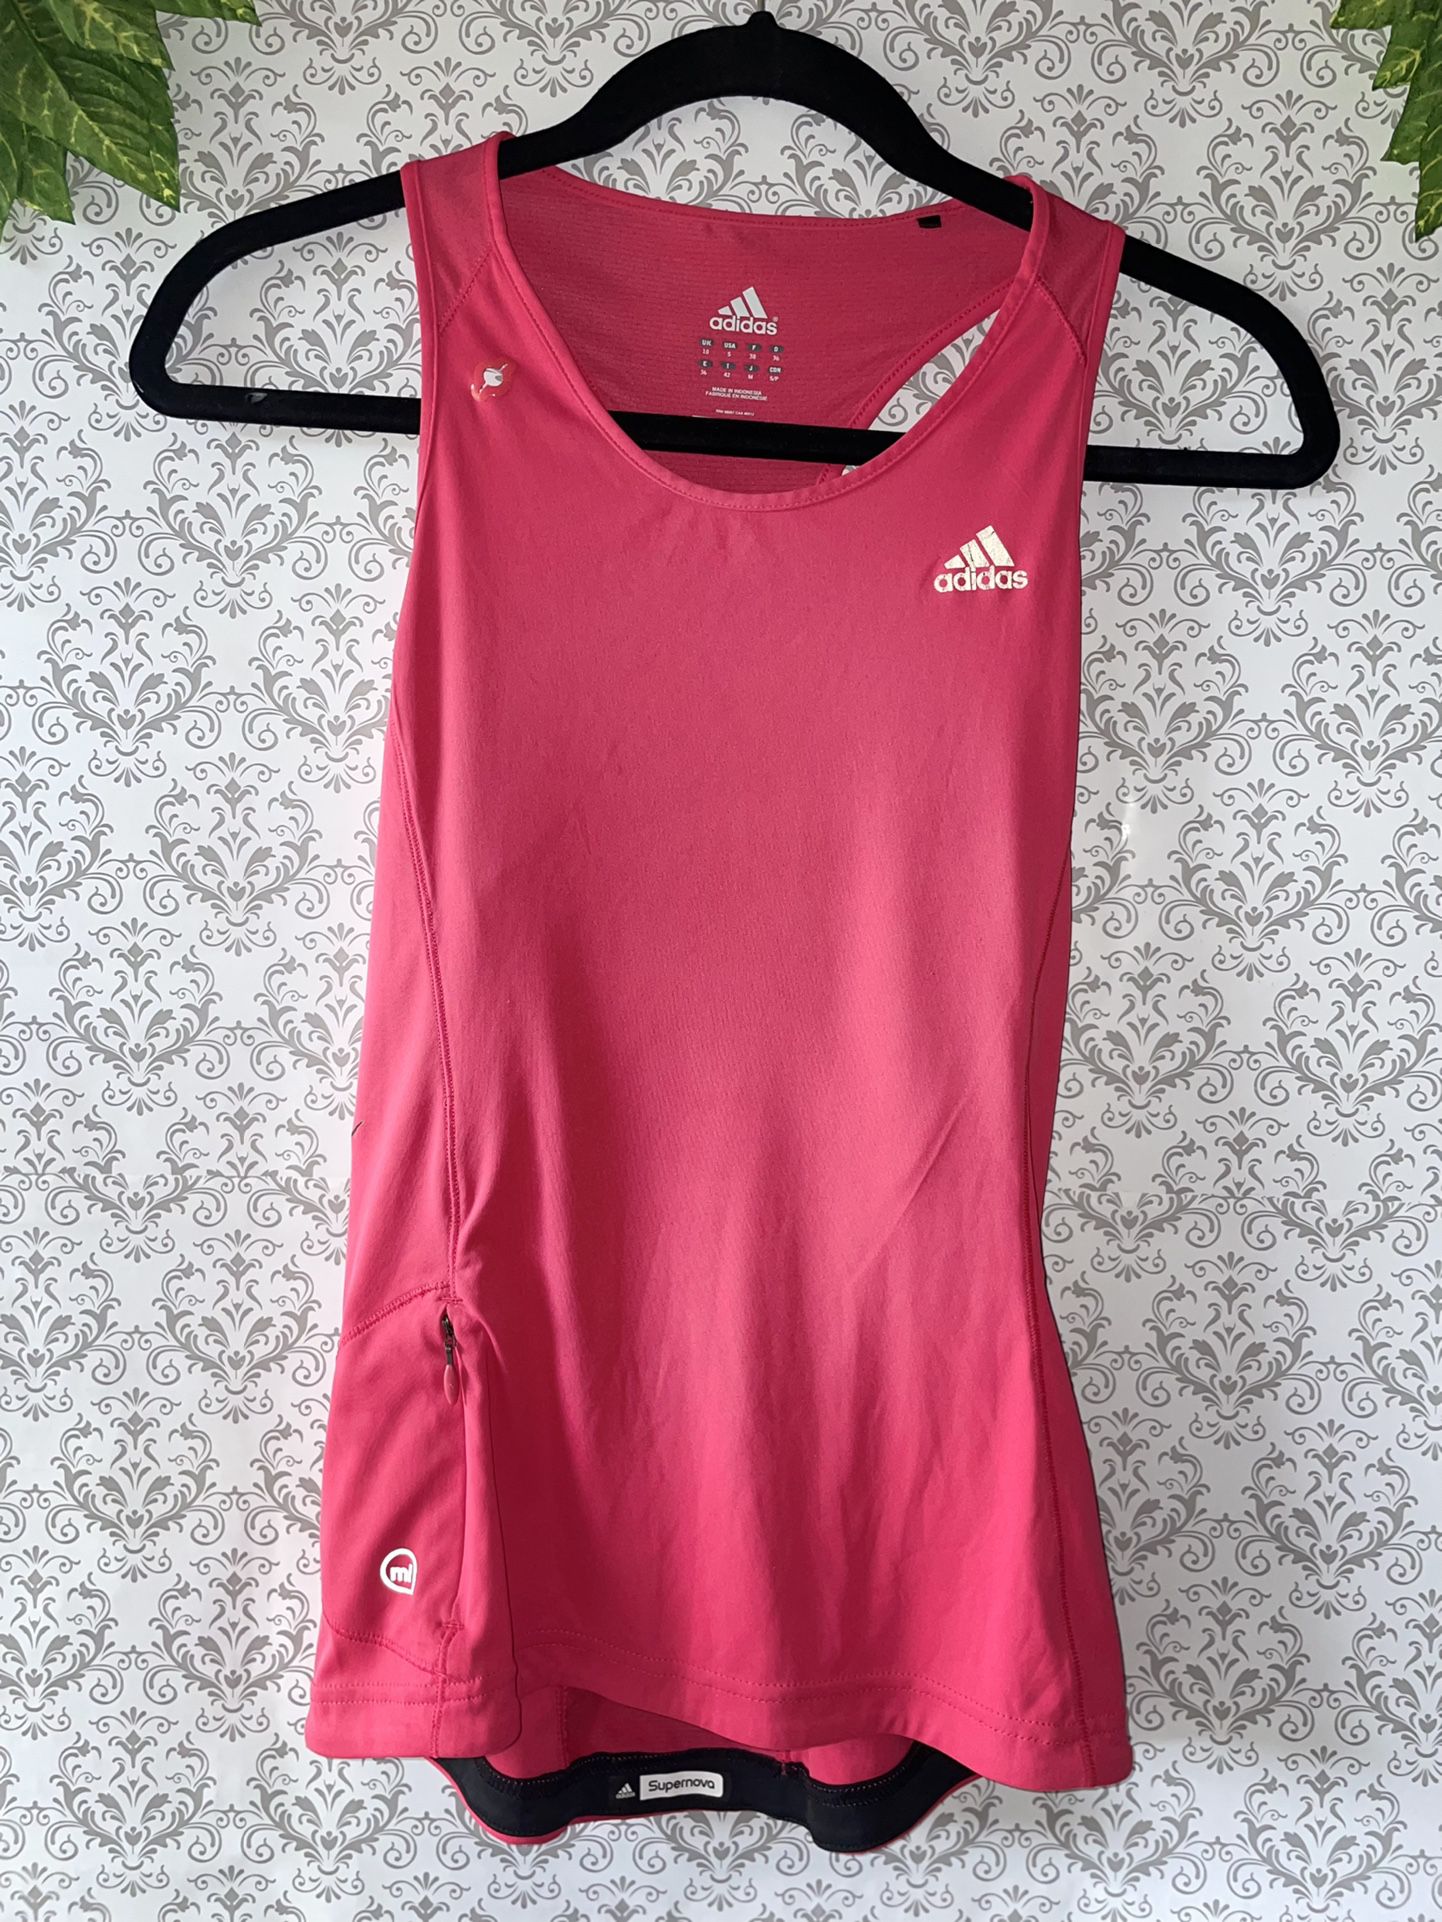 Adidas Women's mi ClimaCool Supernova Racerback Activewear -Size small Pink for Sale Terrell, - OfferUp